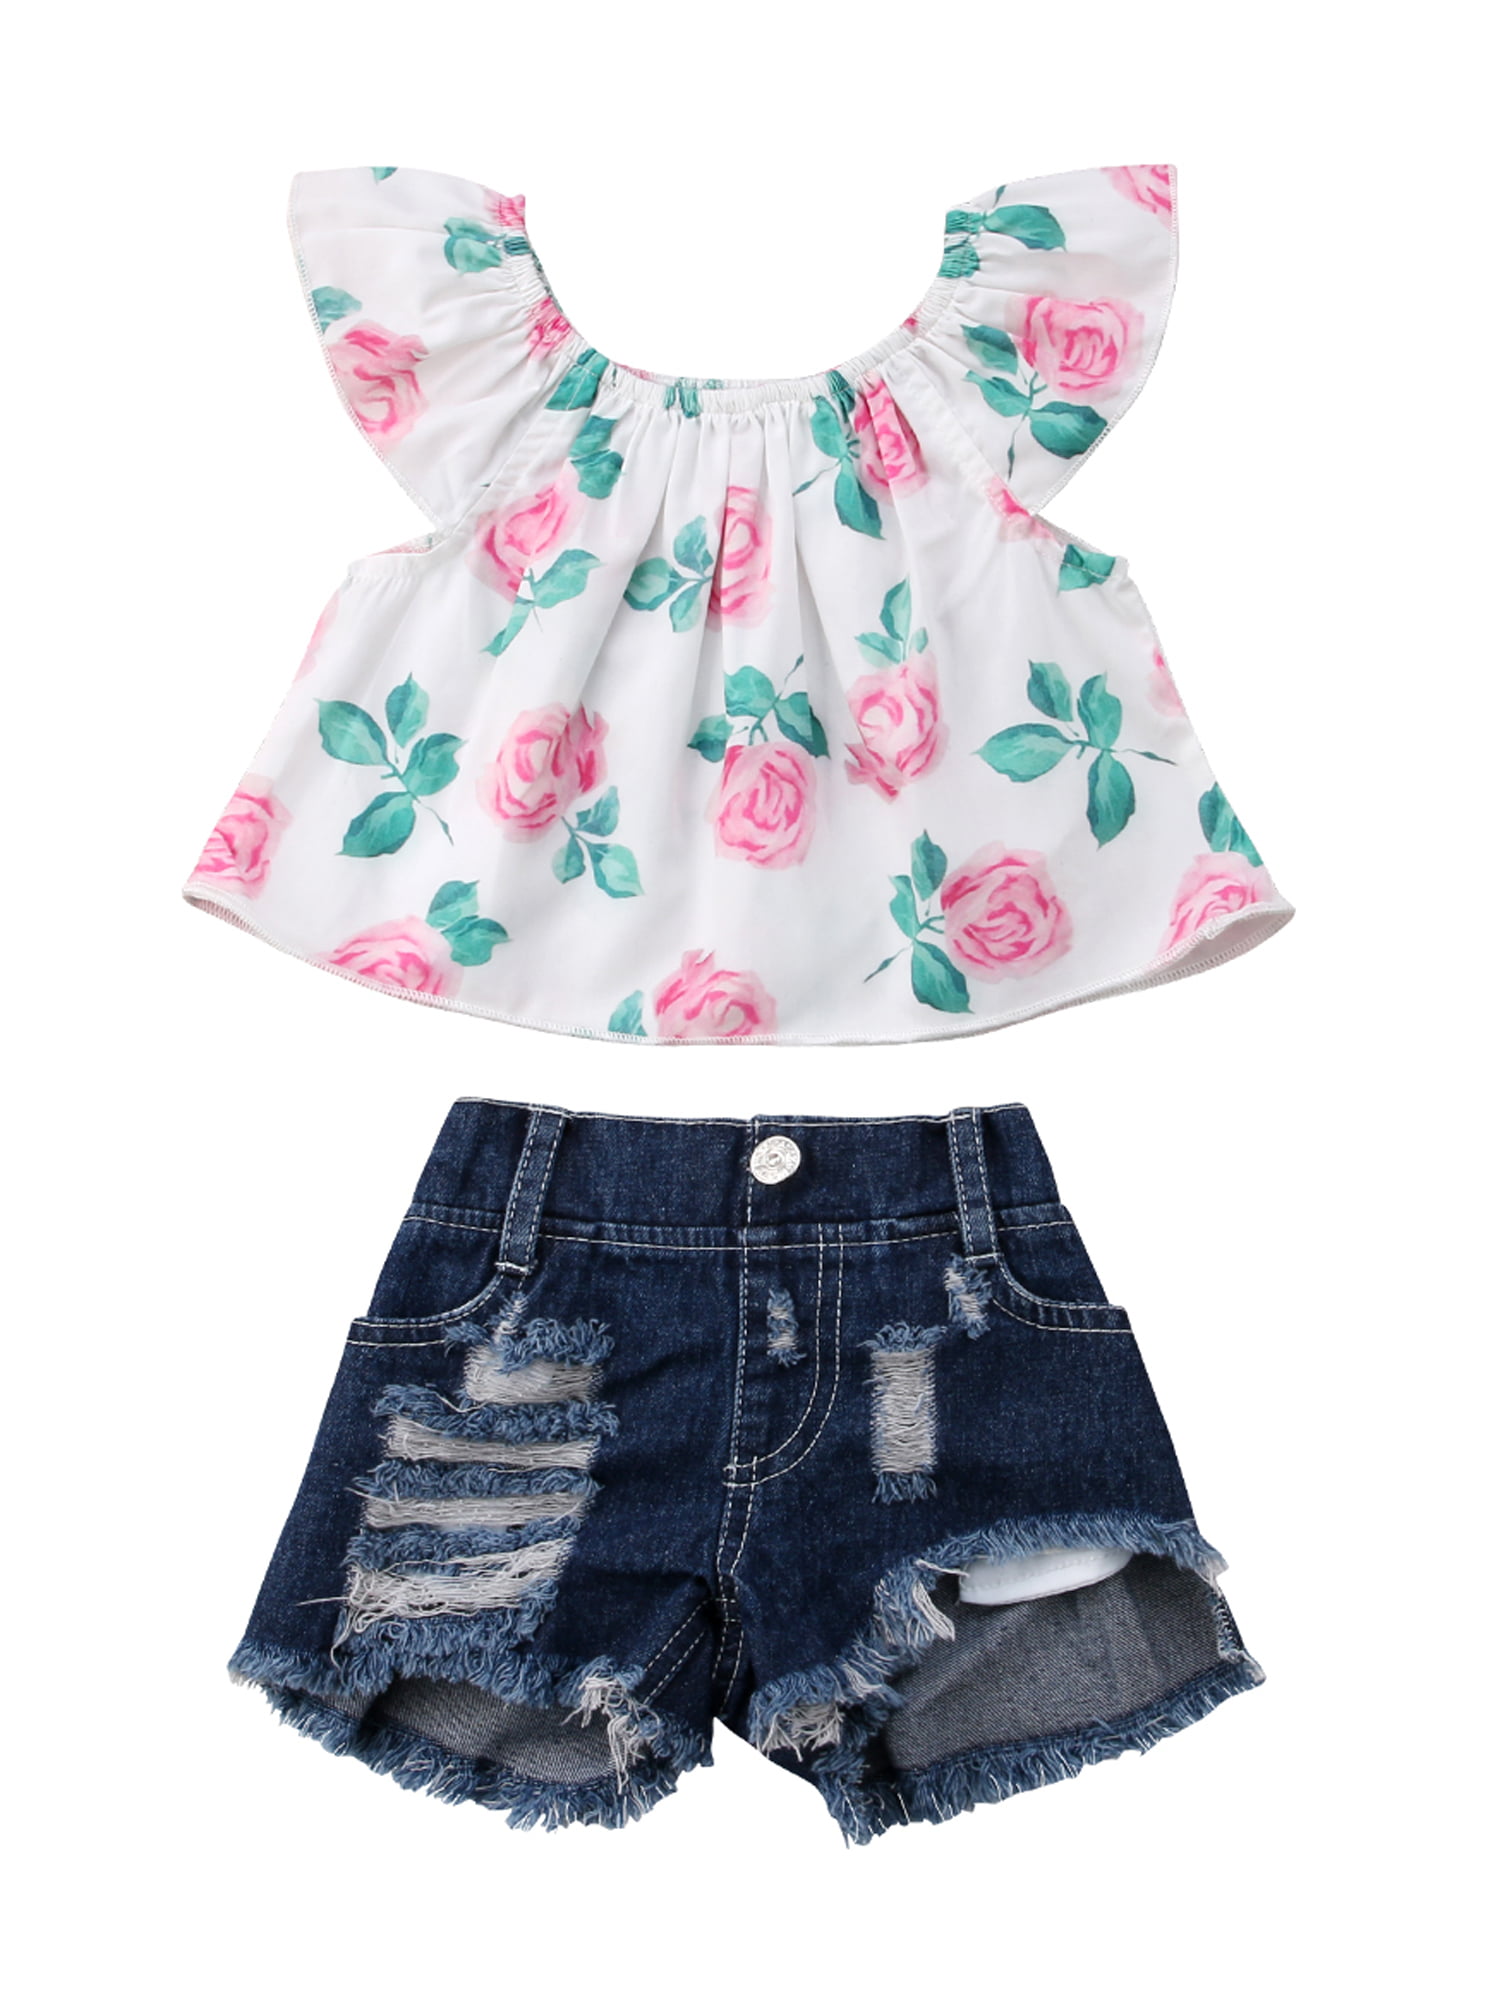 2PCS Toddler Baby Girl Summer Outfit One Shoulder T-Shirt Tops+Frayed Hem Ripped Denim Shorts Clothes Set 